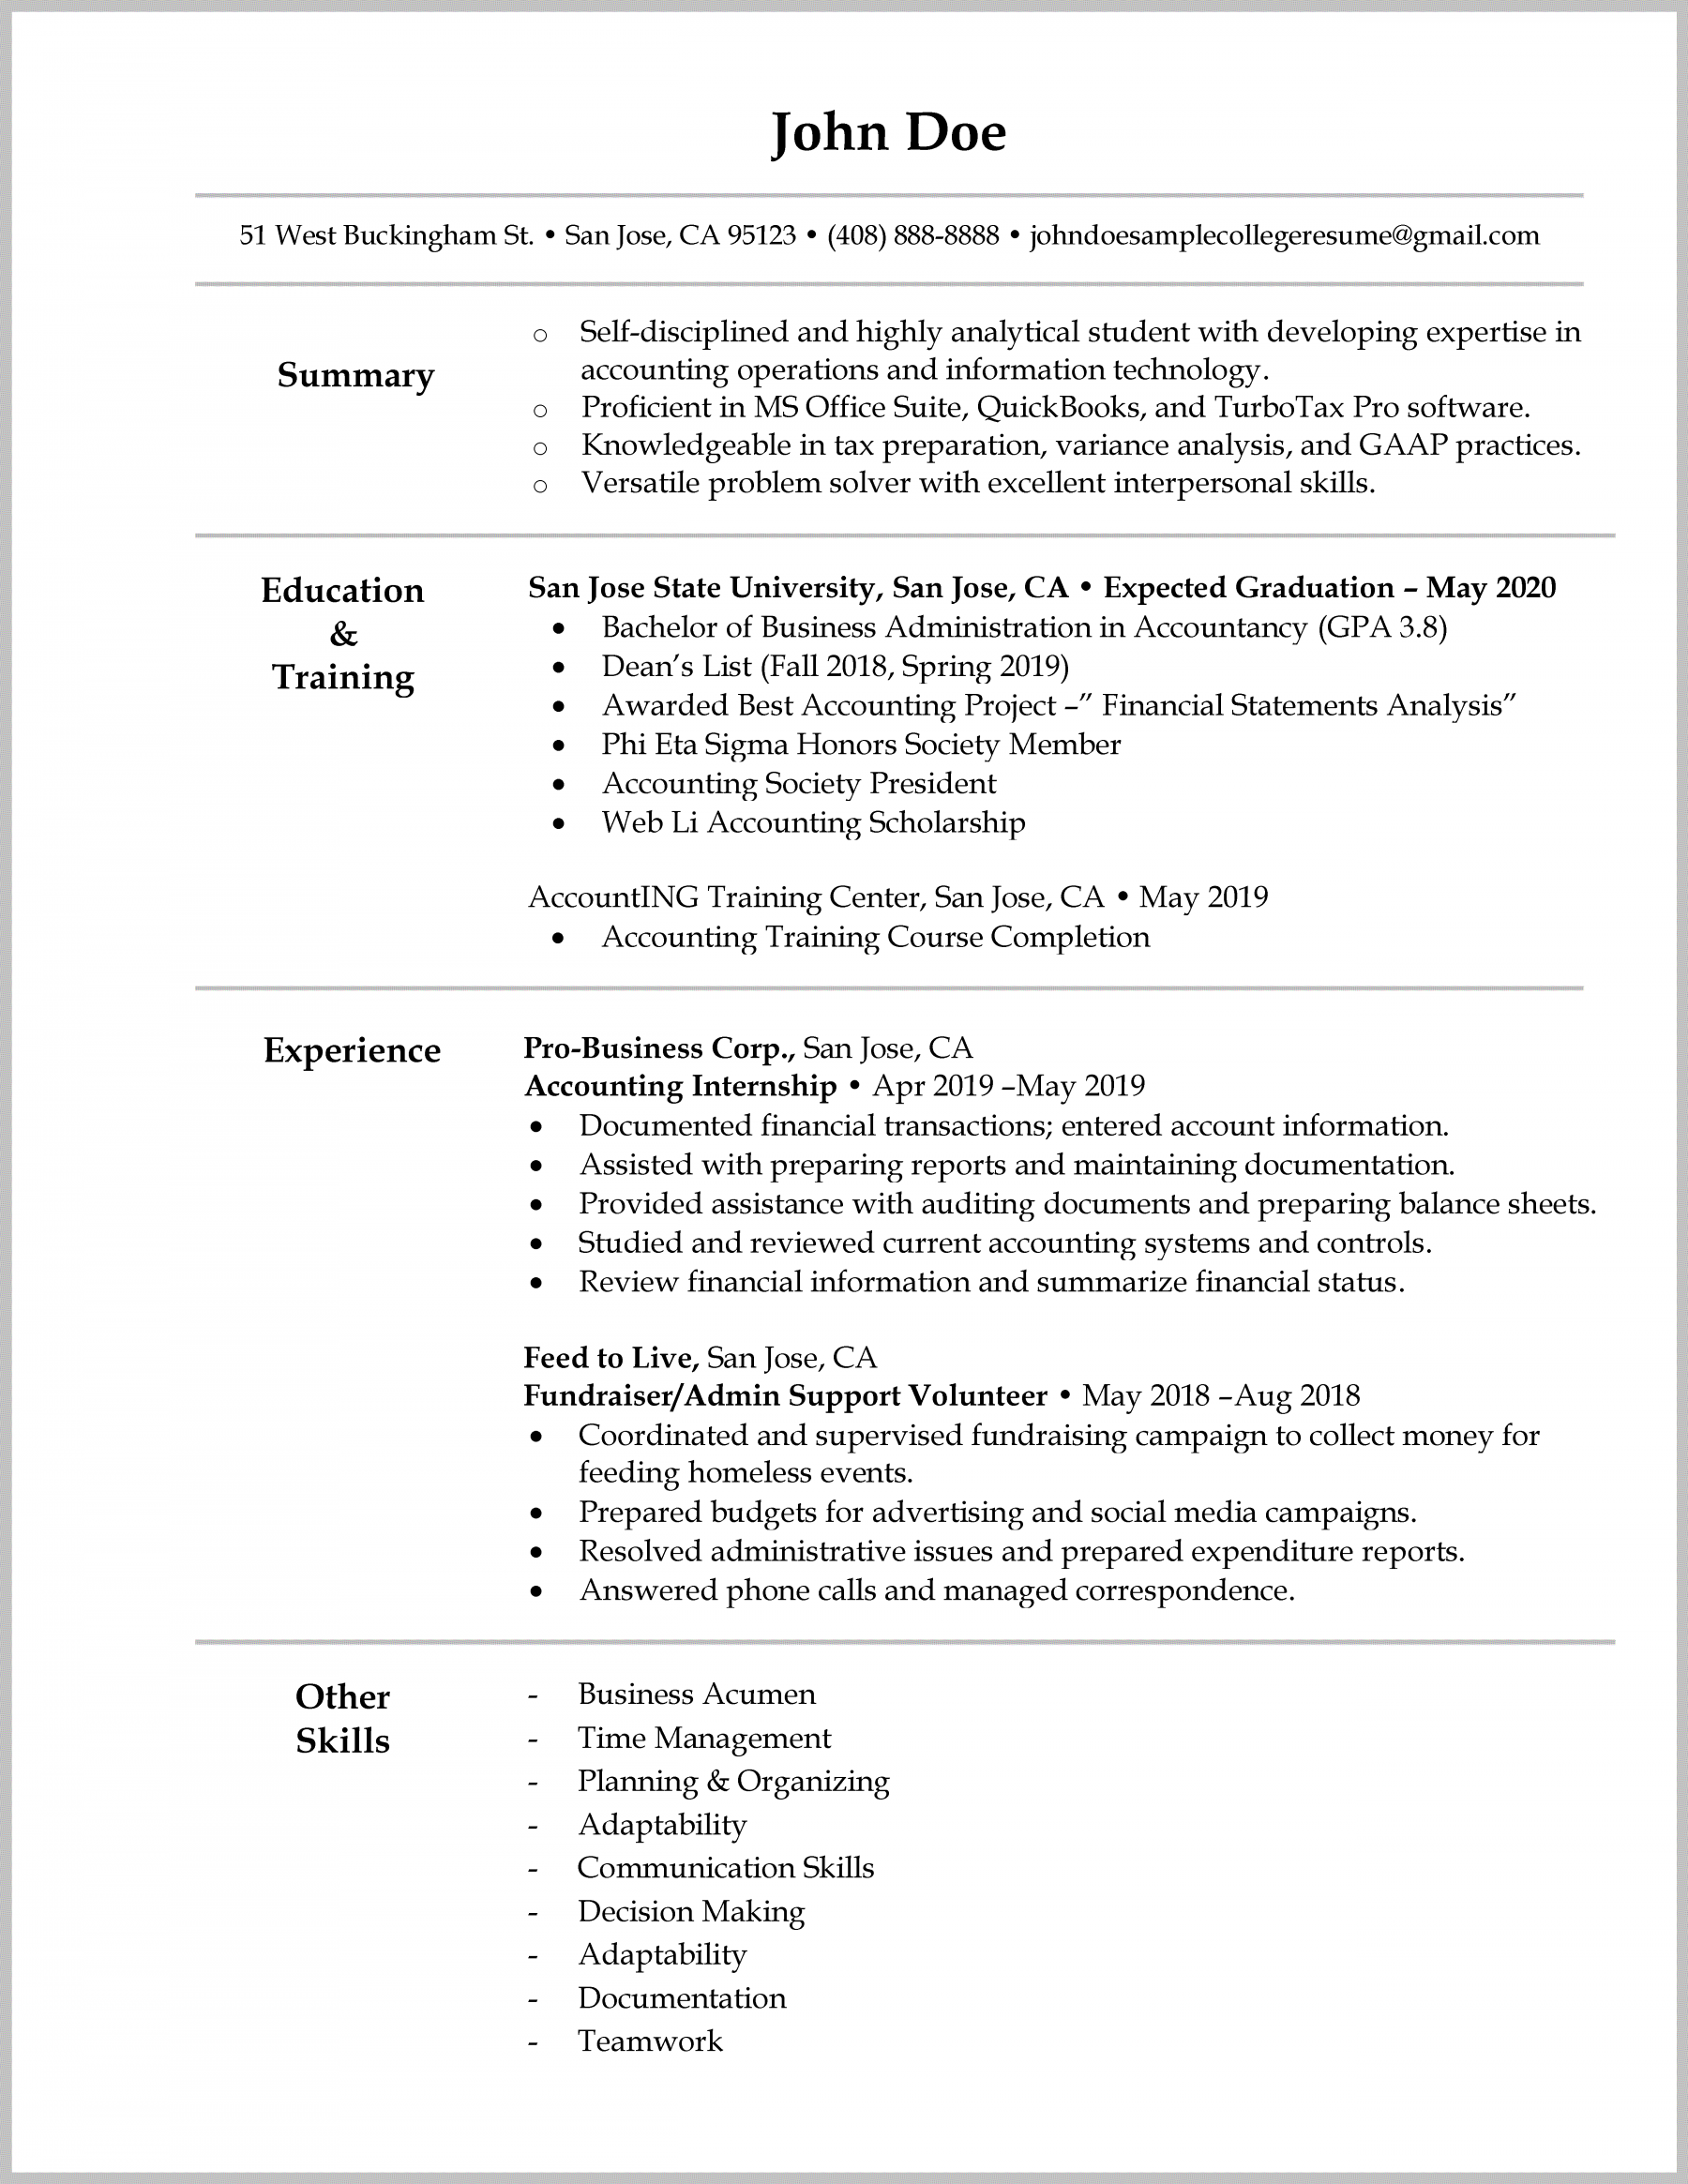 How to Write a College Student Resume?